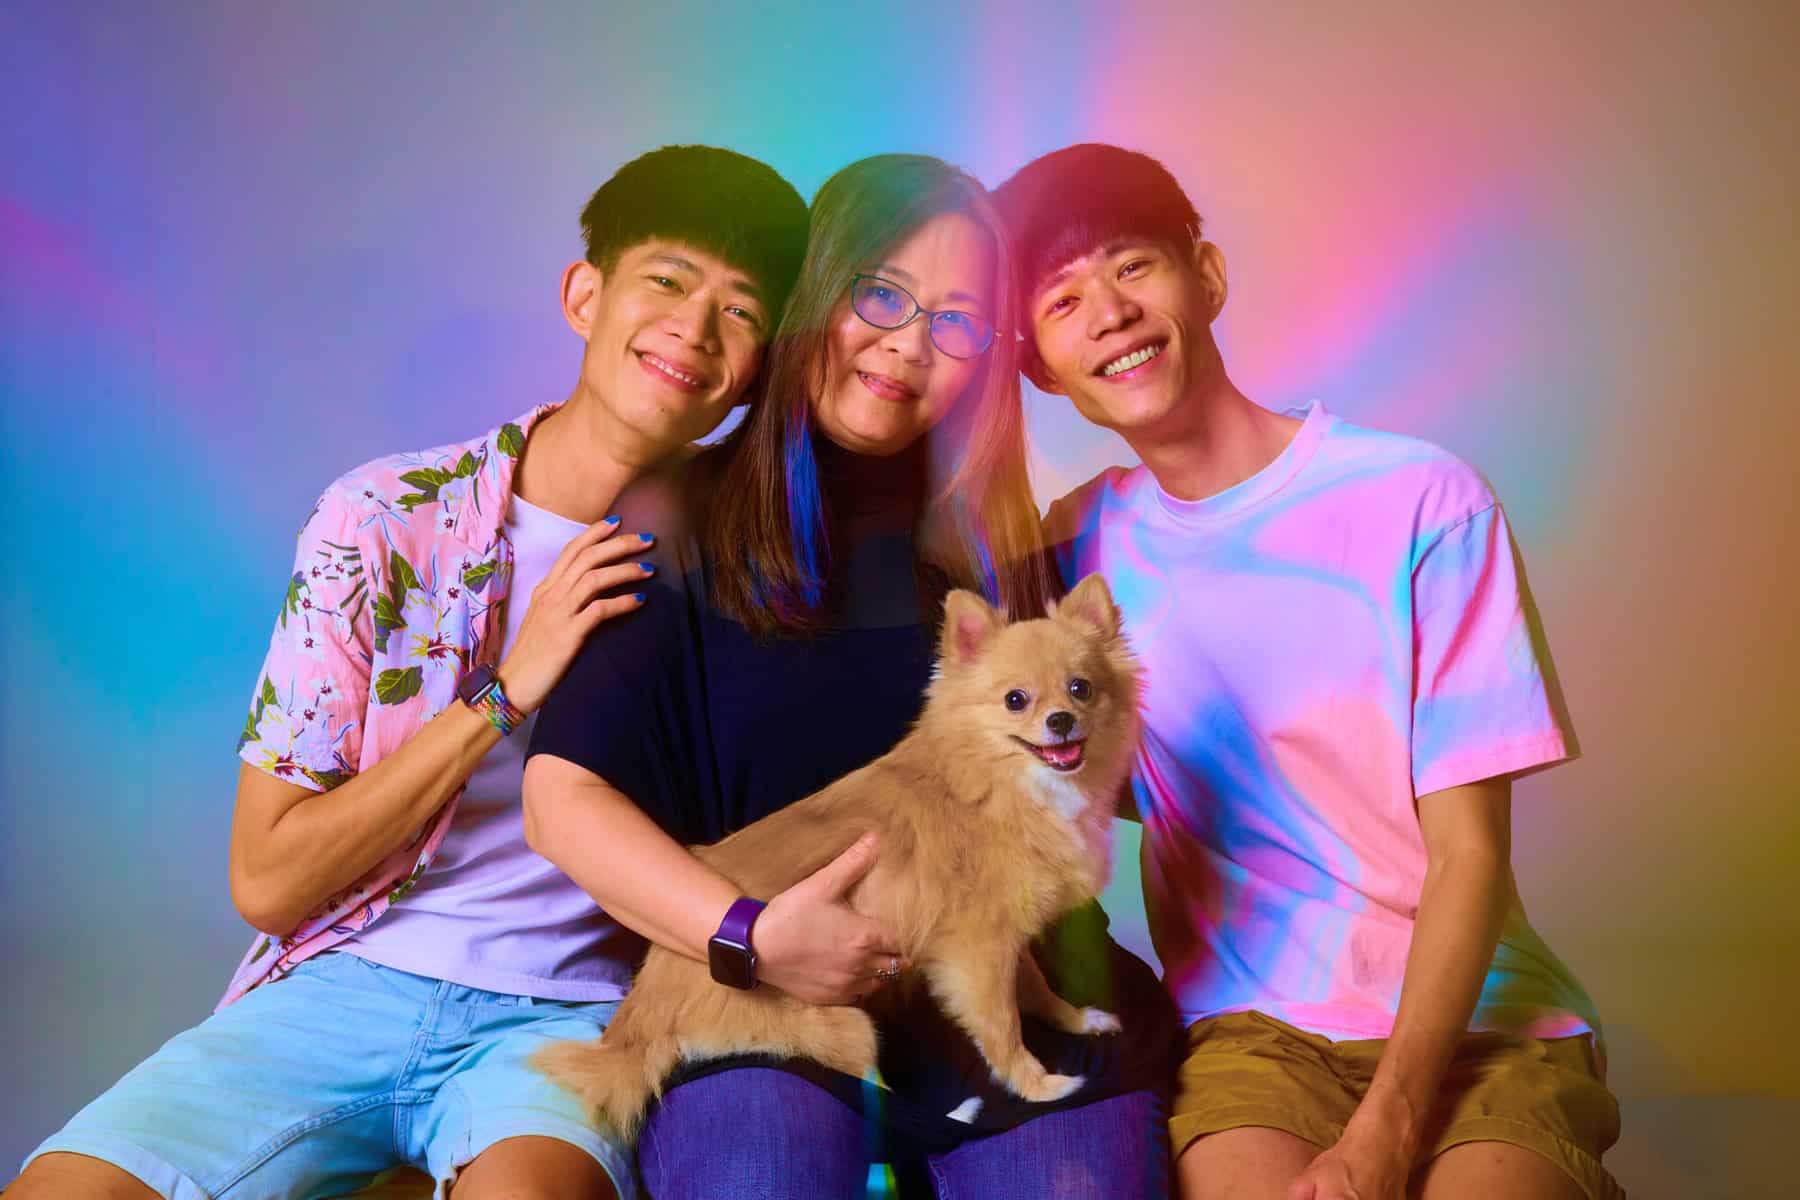 A photo from a sample Rainbow Families photoshoot in early 2023. Image courtesy of Rainbow Families, taken by Toh Xing Jie.